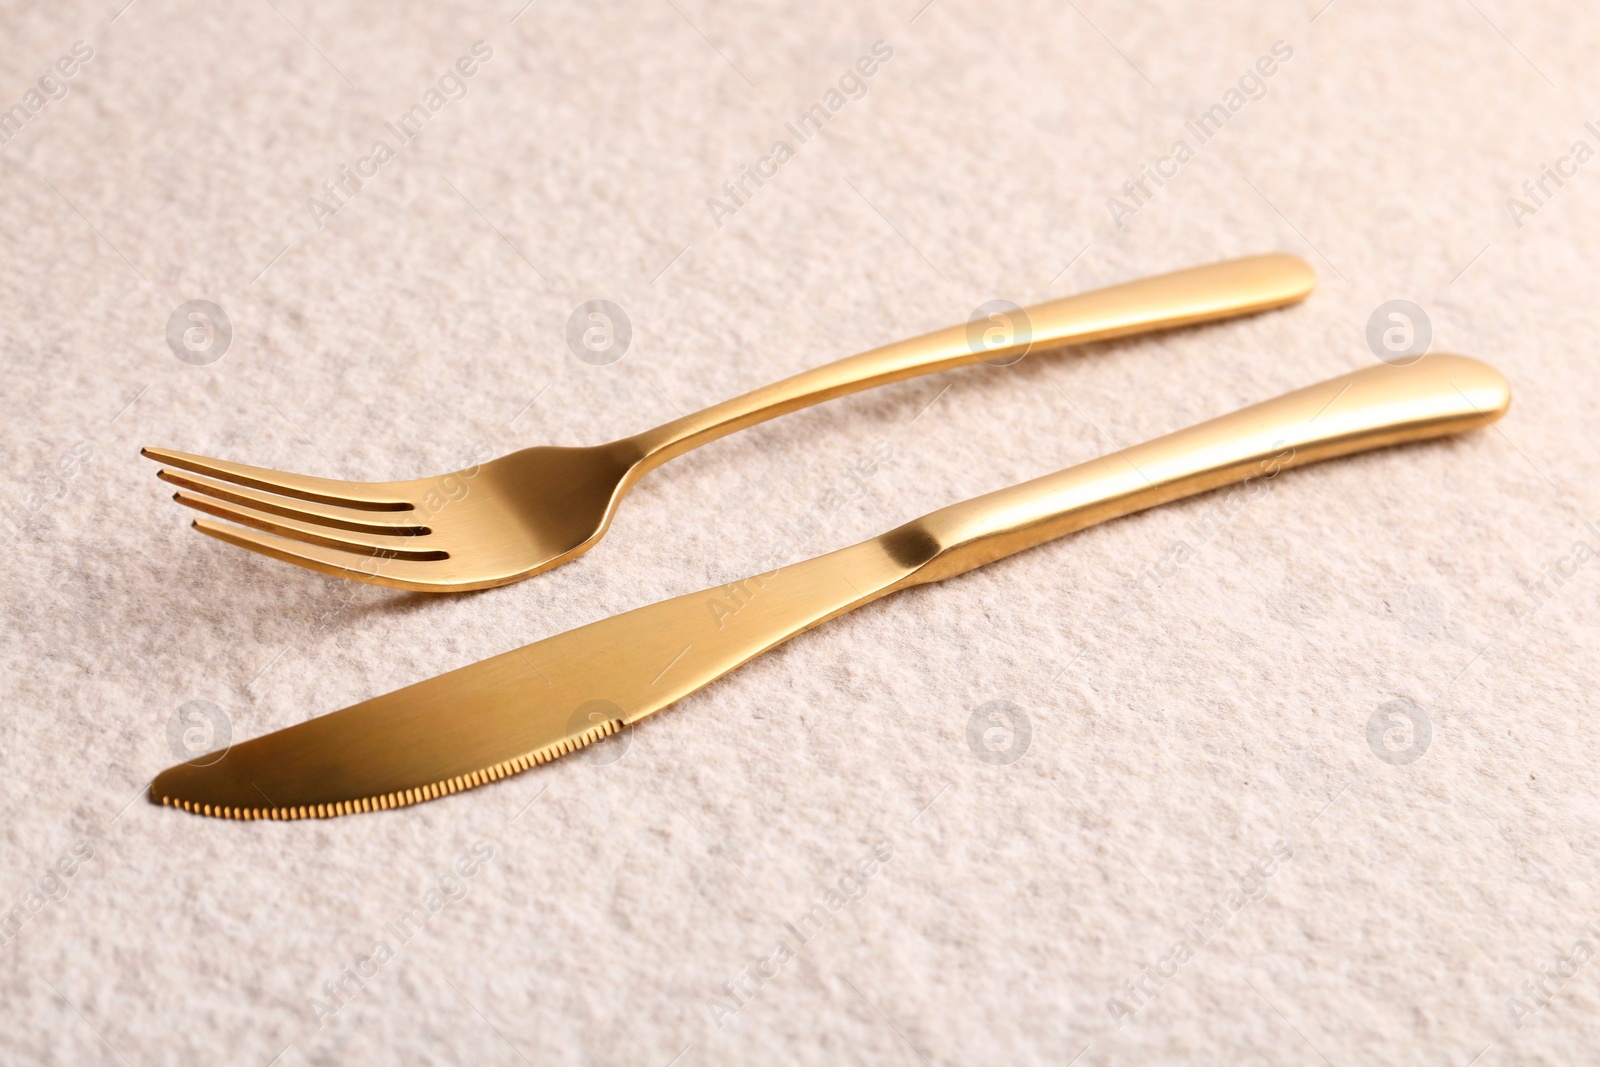 Photo of Stylish cutlery. Golden knife and fork on light textured table